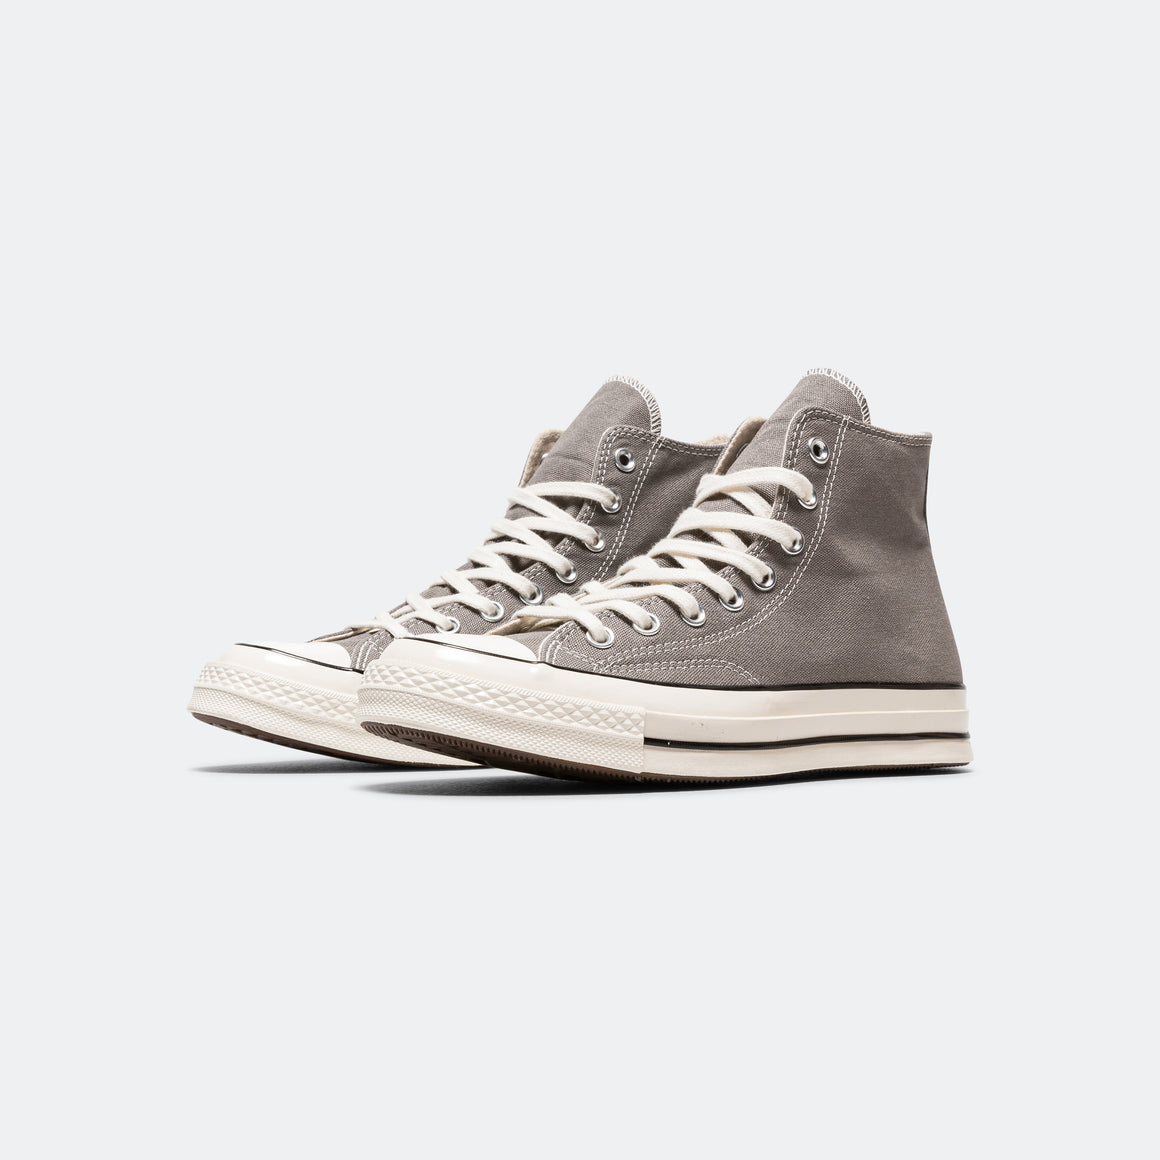 Converse - Chuck 70 Vintage Canvas High - Origin Story/Egret-Black - UP THERE